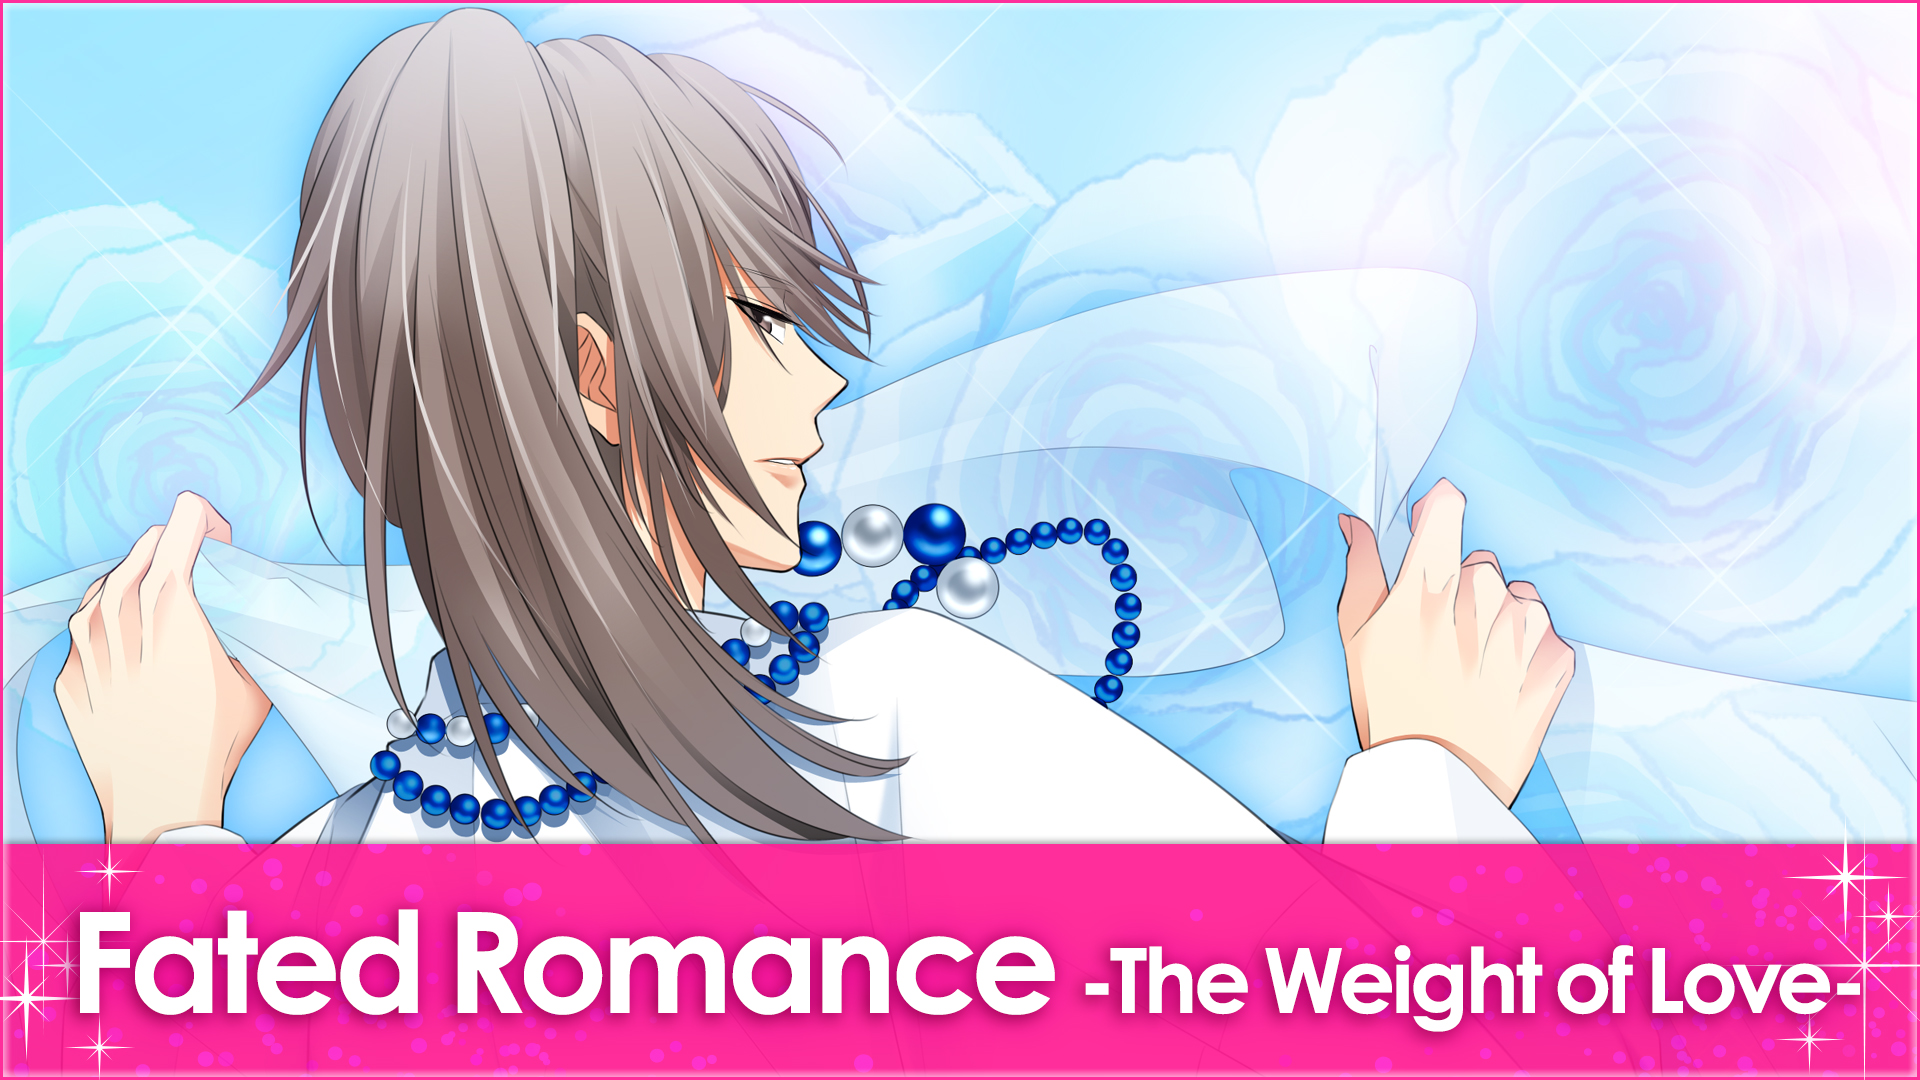 Fated Romance -The Weight of Love-